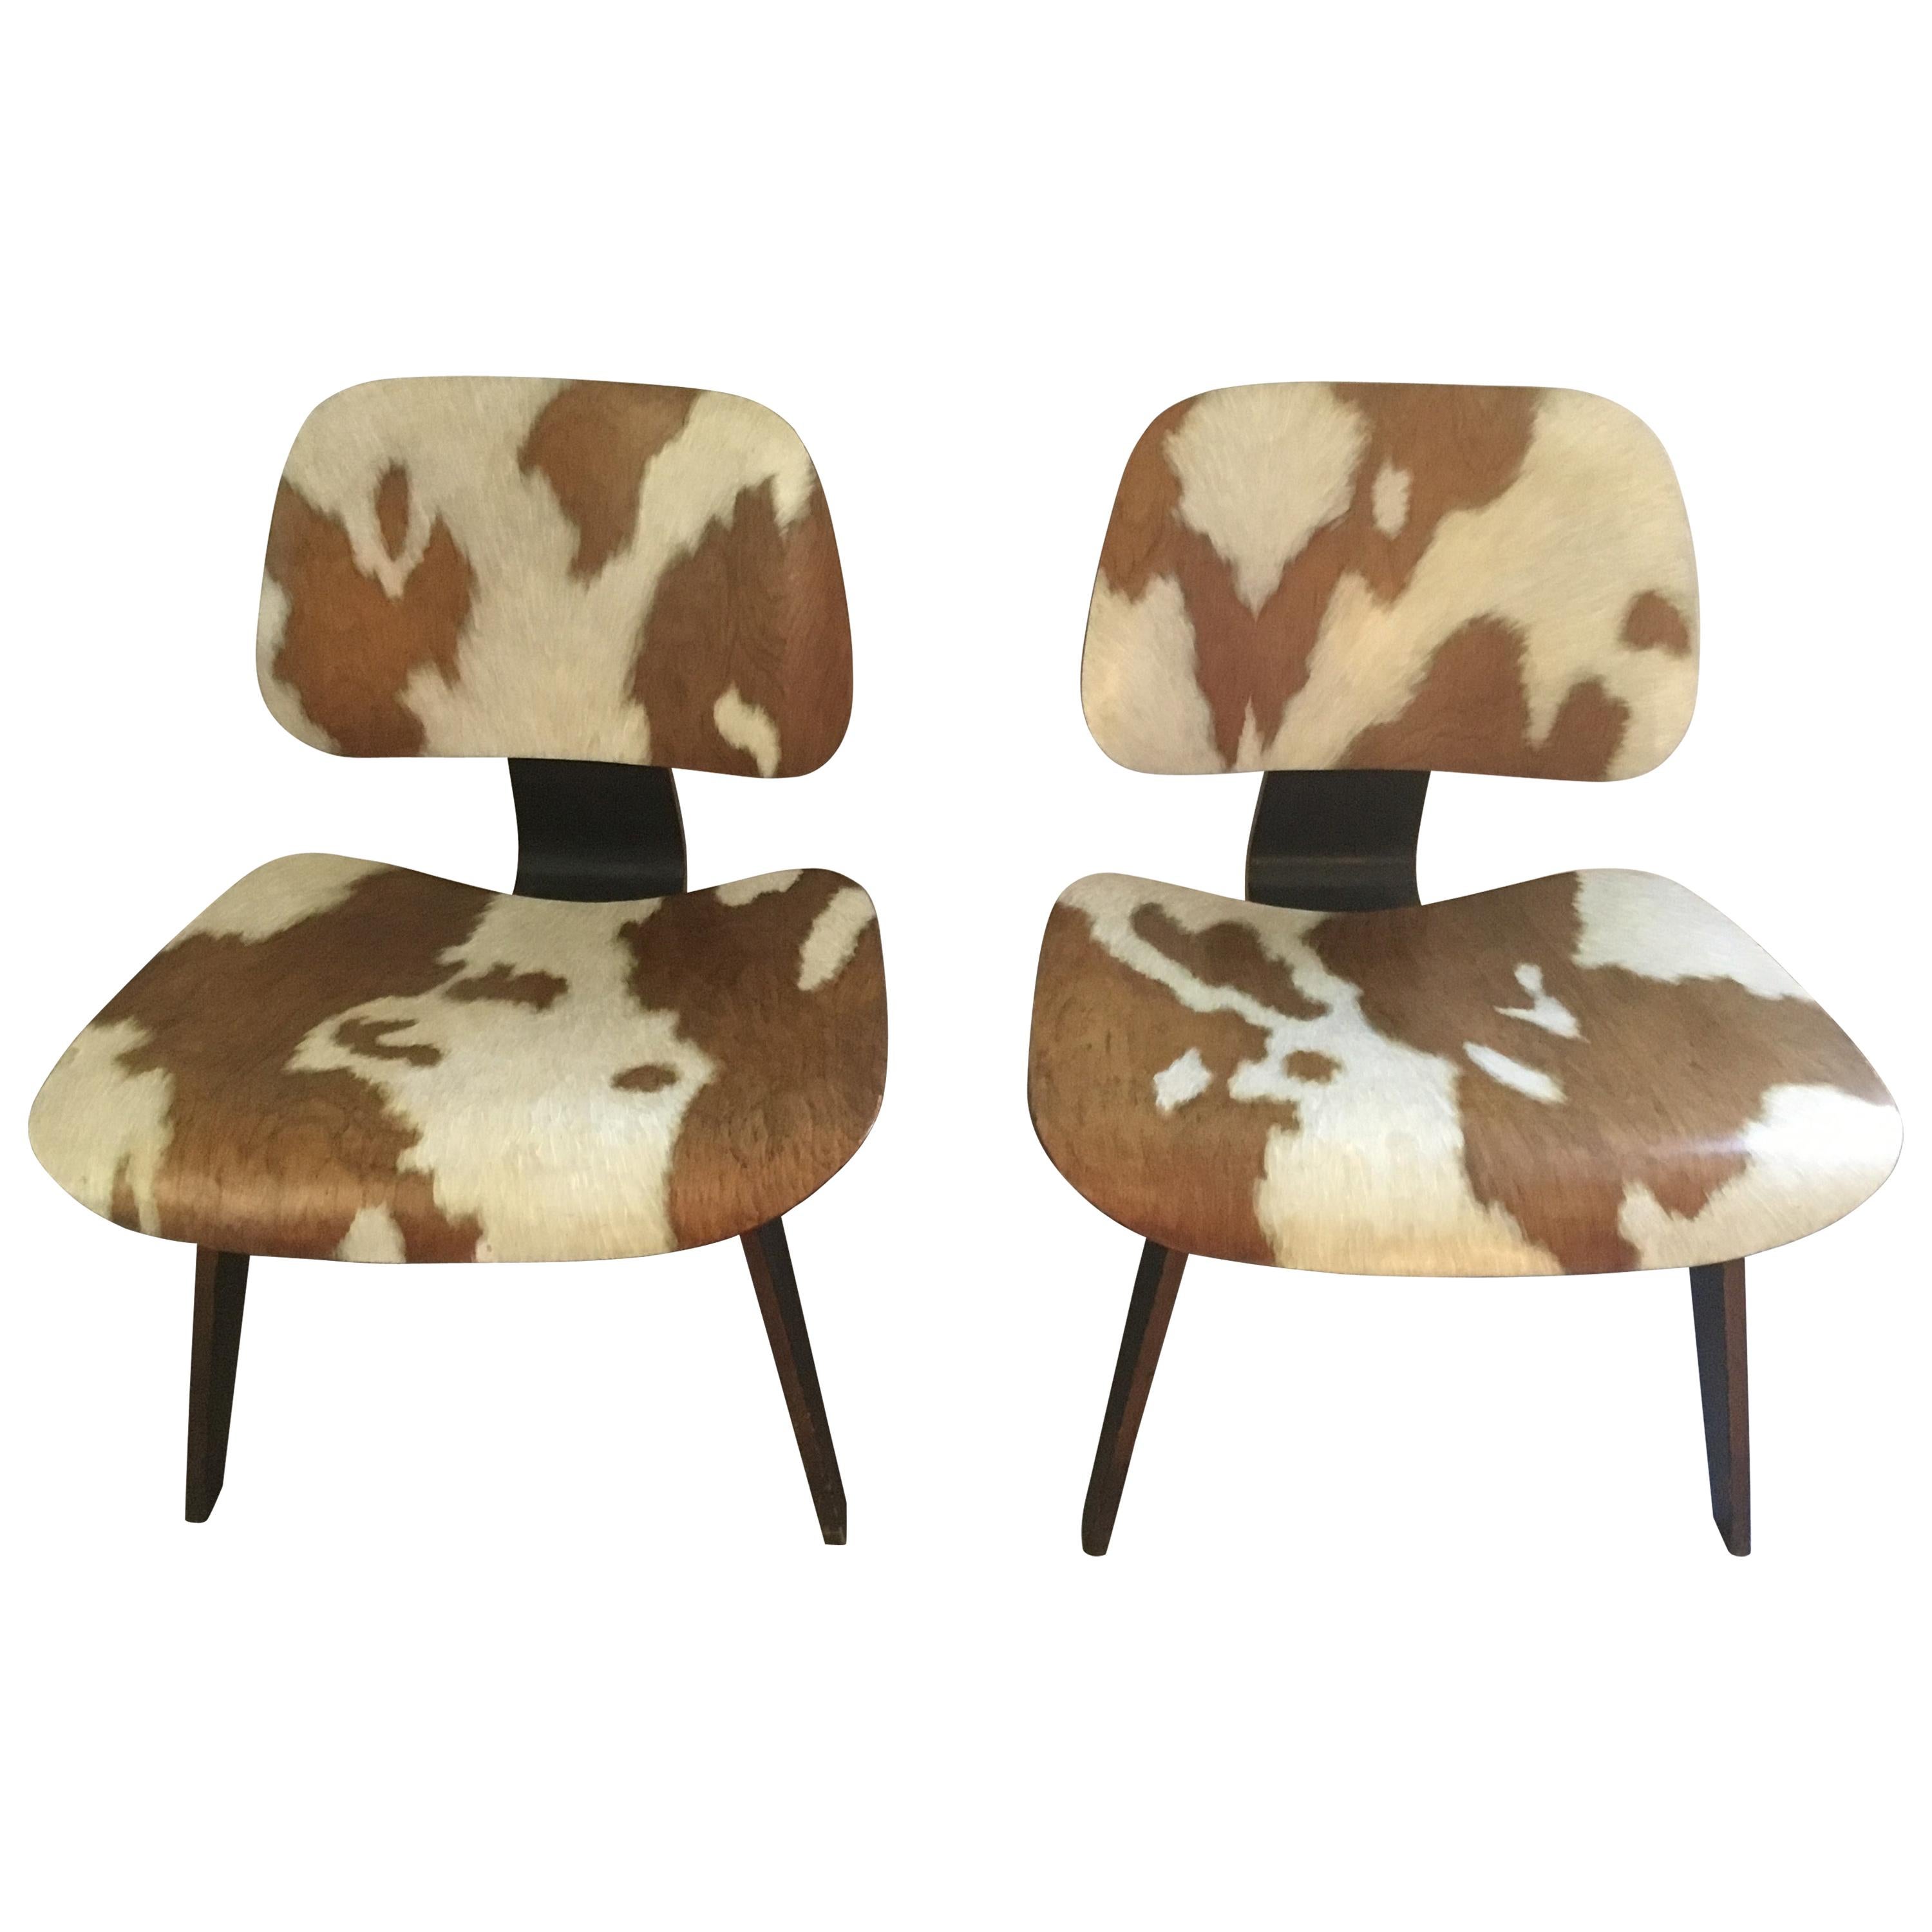 Pair of Iconic LCW Eames Chairs with Faux Cowhide Finish by Lynn Curlee